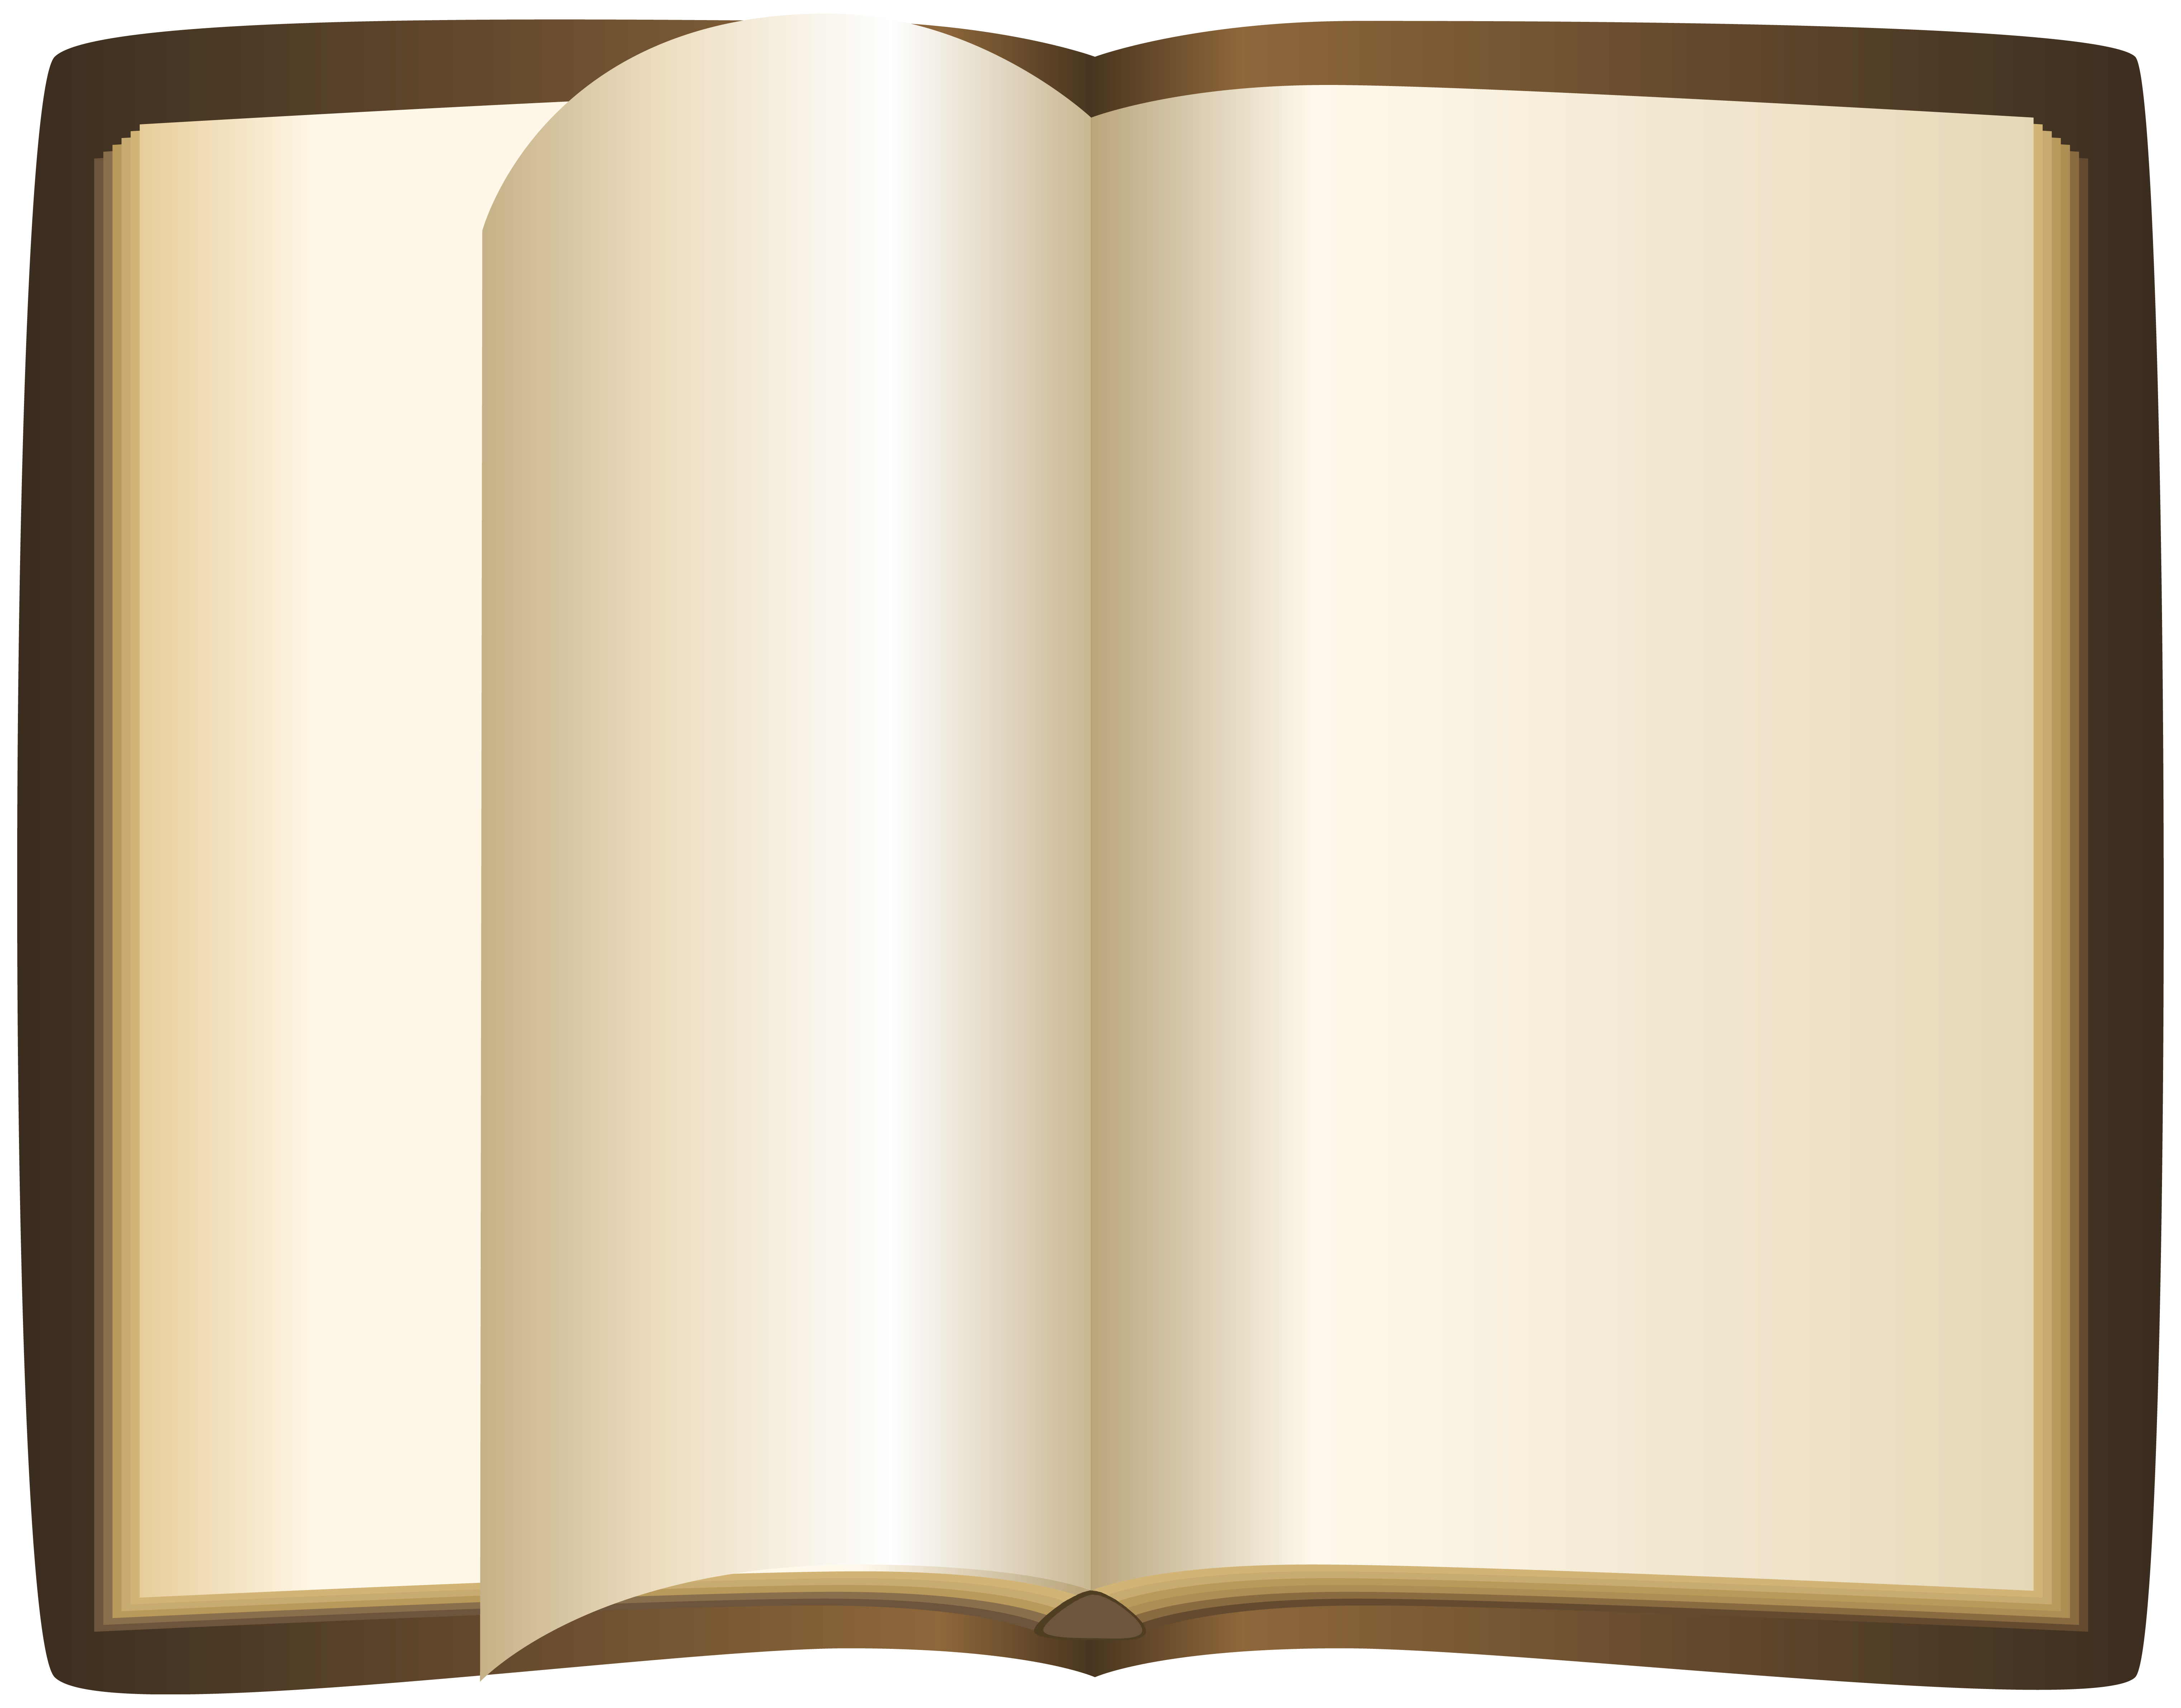 open book clipart png